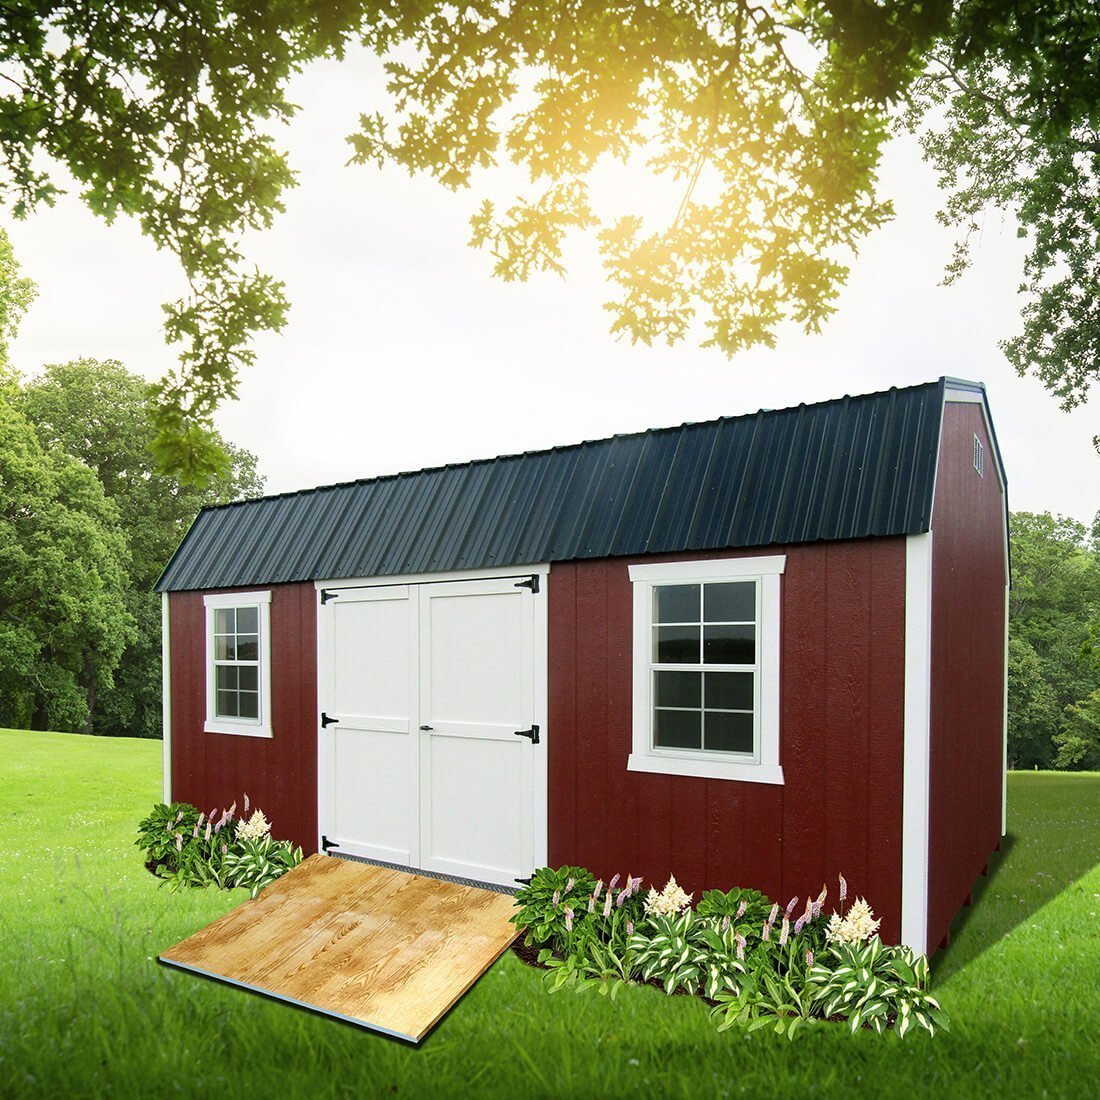 Maroon northeast dutch barn with white trim and black metal roof